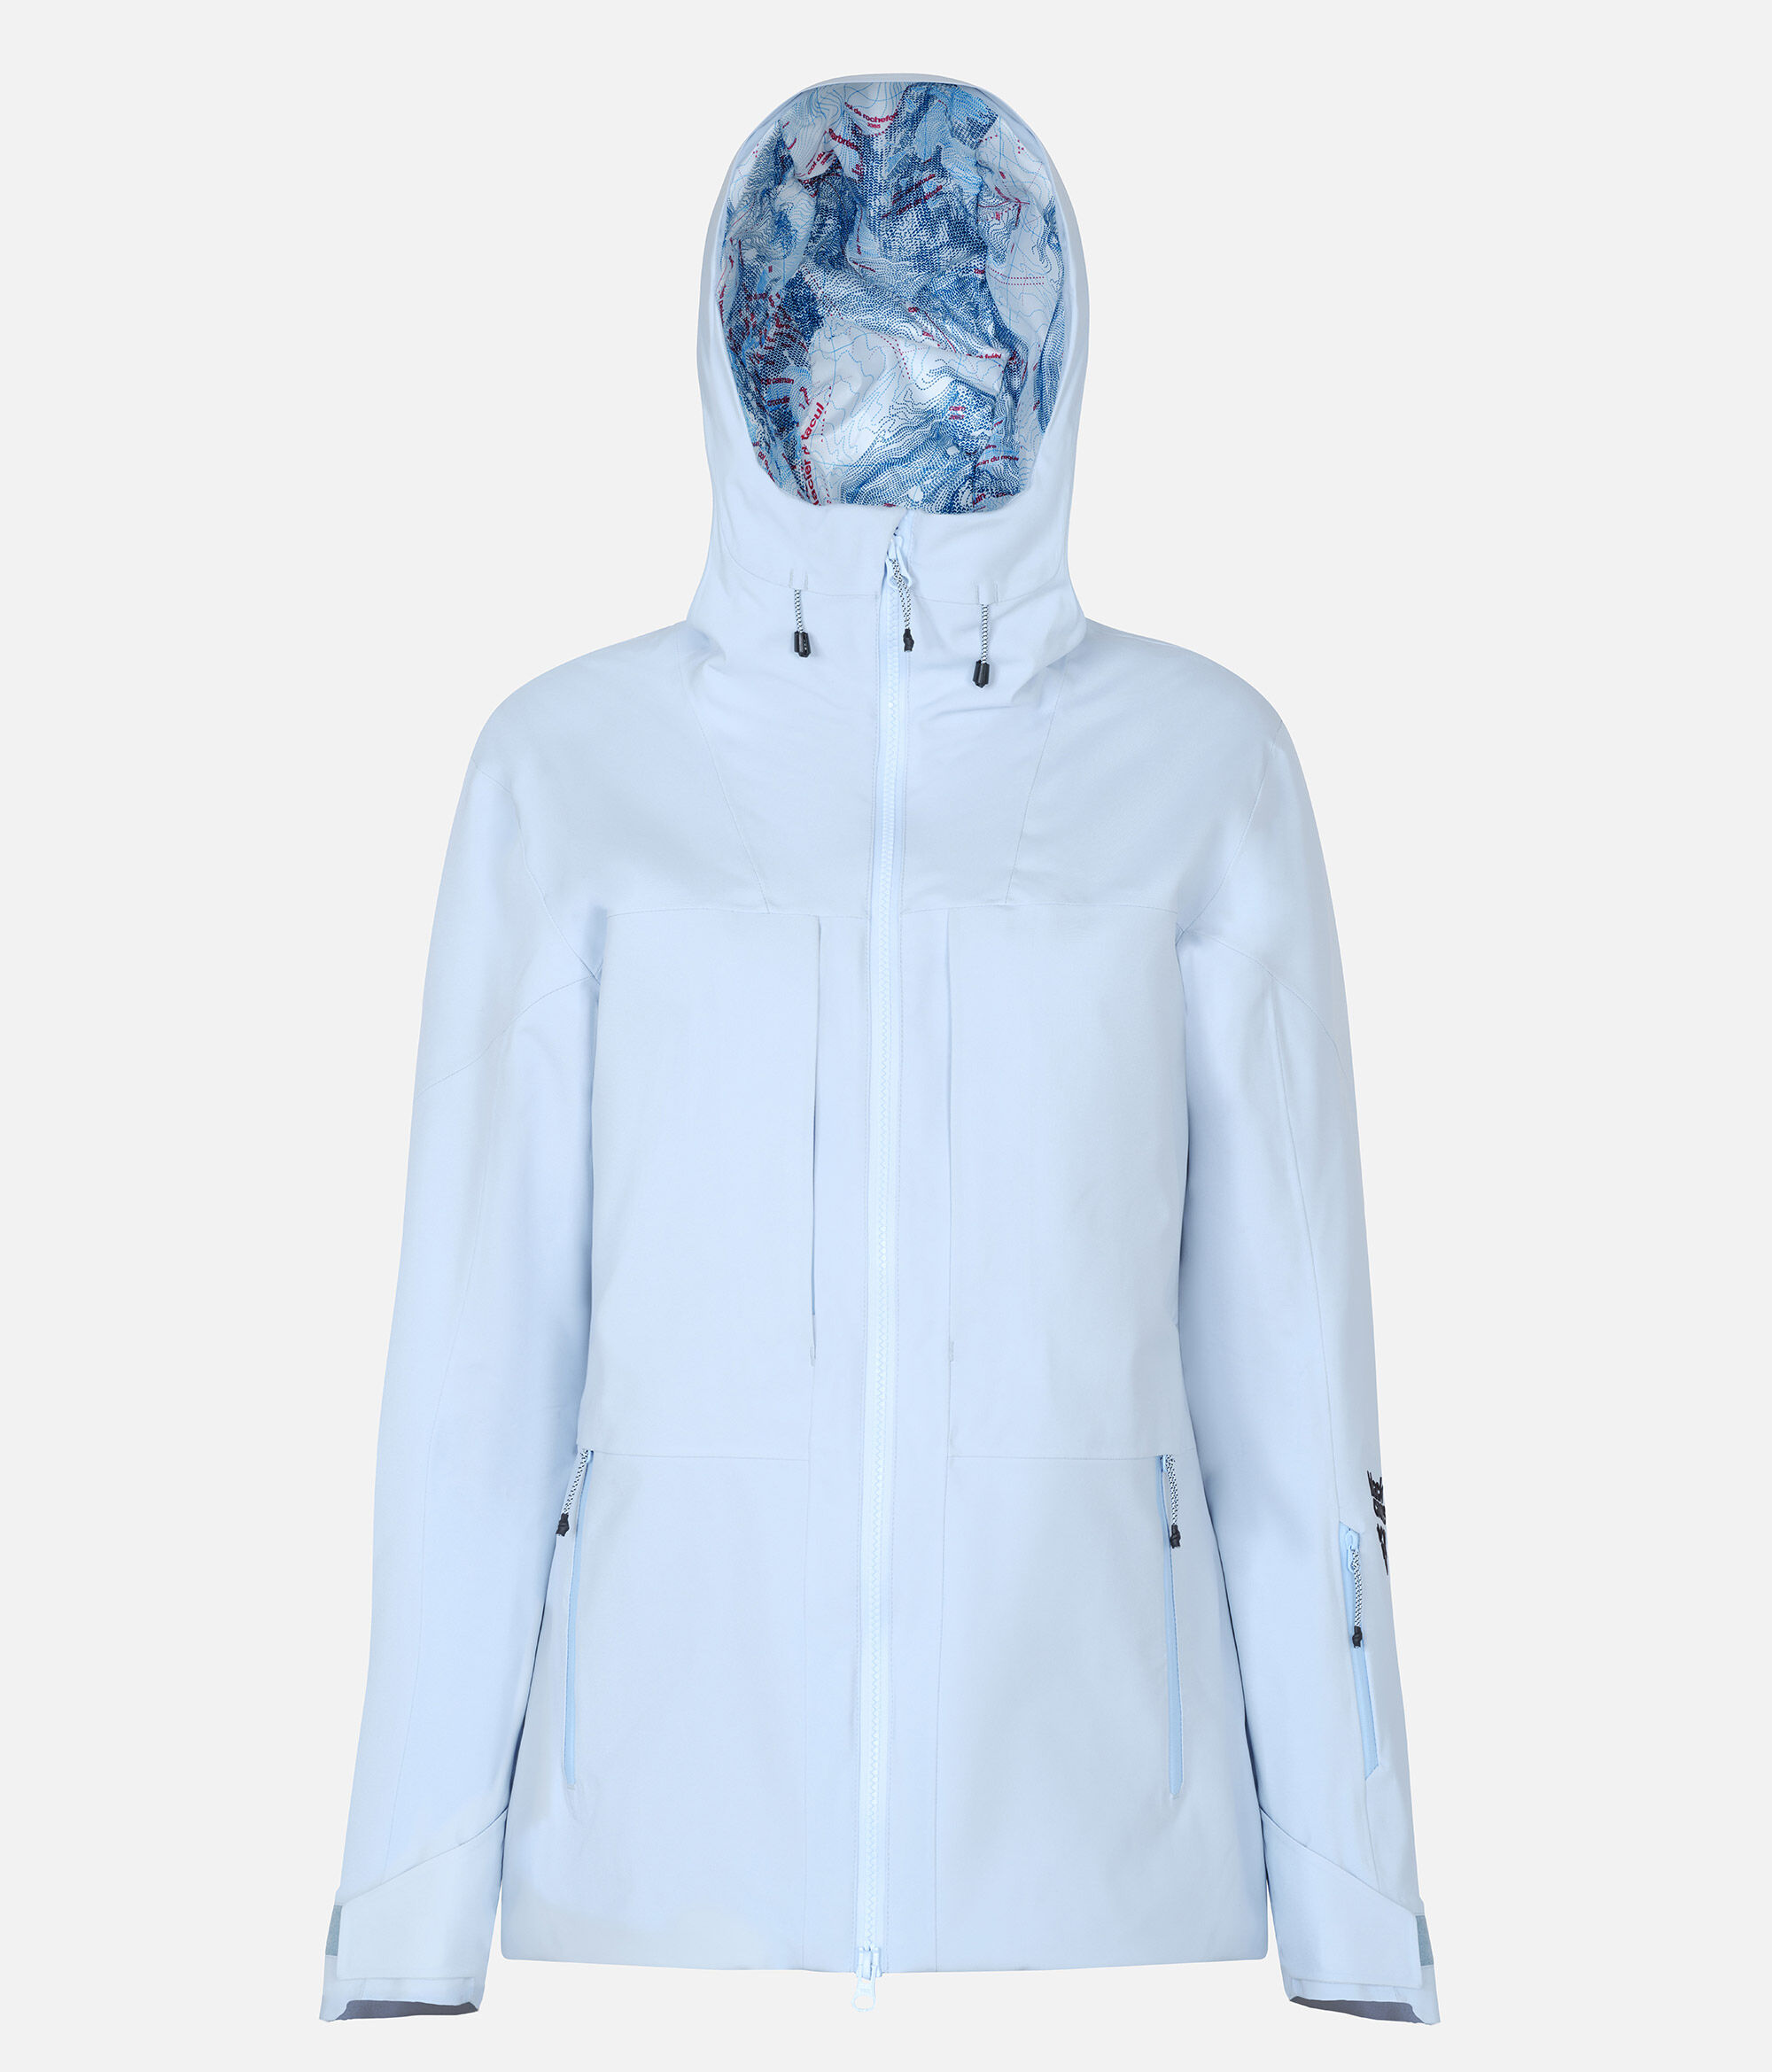 Single-breasted jacket - Light blue - Ladies | H&M IN